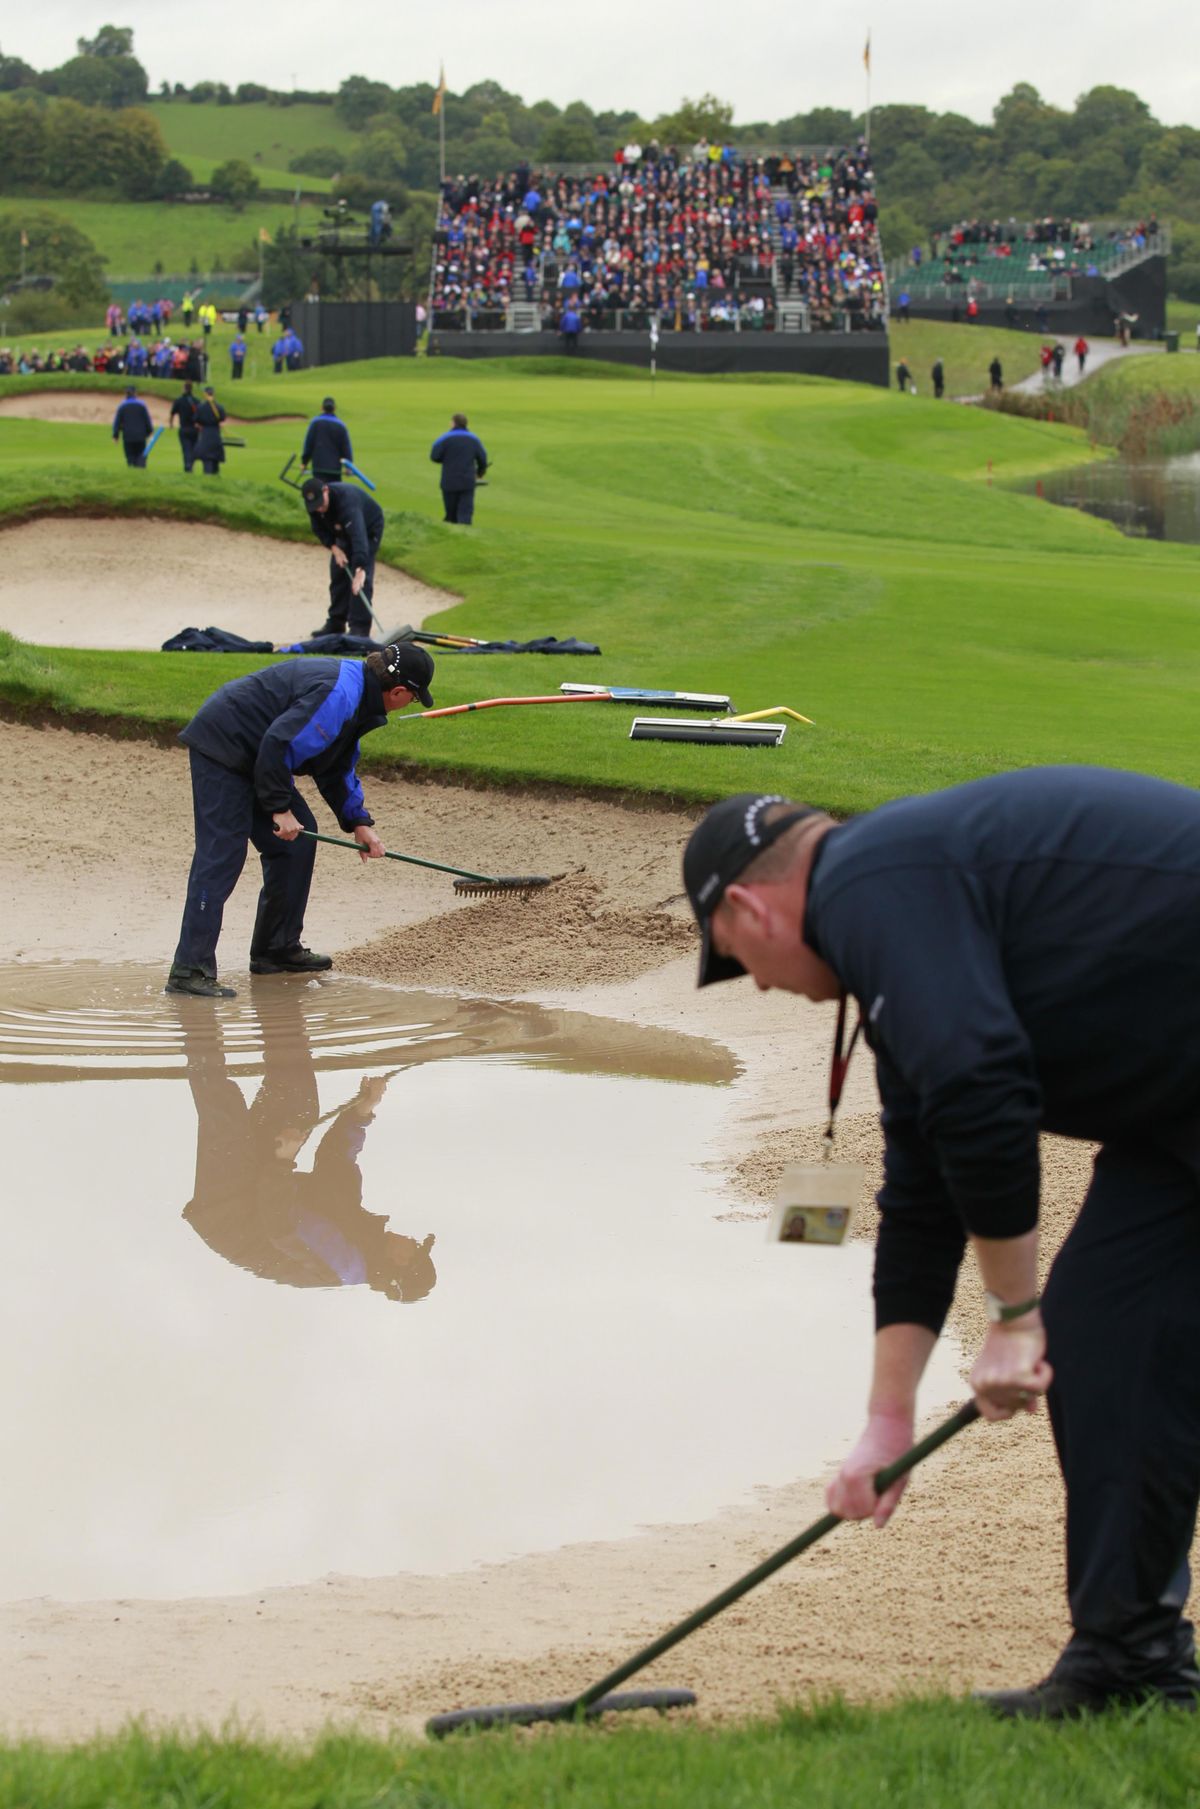 Greenkeepers prepare the bunkers after heavy rainfall suspended play during the 2010 Ryder Cup golf tournament at the Celtic Manor golf course in Newport, Wales, Friday, Oct.  1, 2010.  (Matt Dunham / Associated Press)